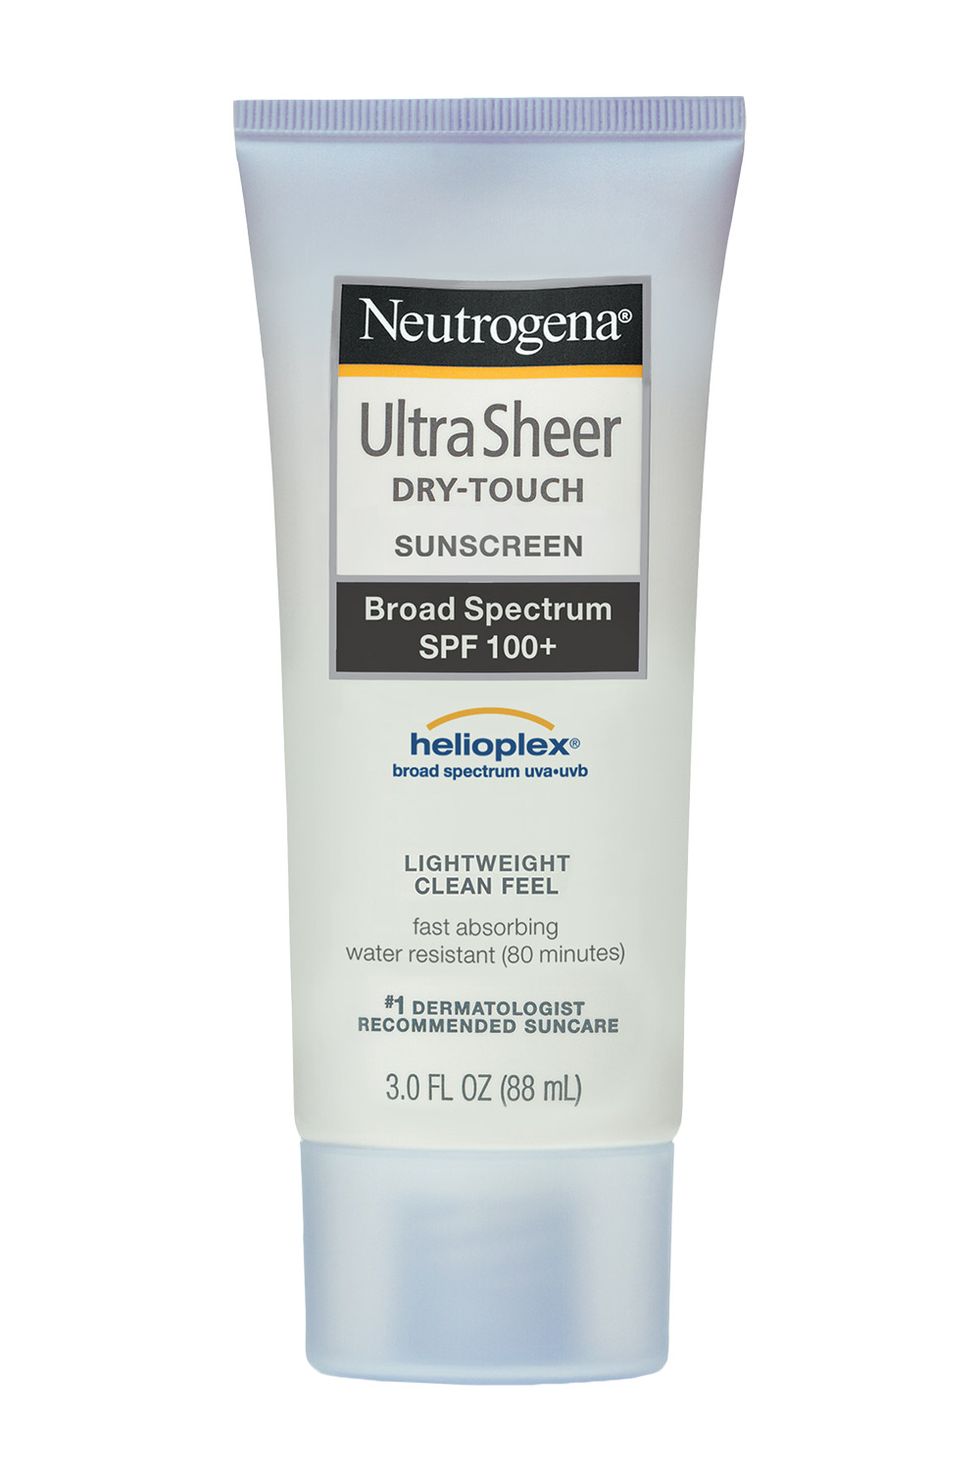 <p>Water-resistant <strong>Neutrogena Ultra Sheer Dry-Touch Sunscreen Broad Spectrum SPF 100+</strong><strong></strong> is a no-brainer for the beach bag. And the non-shiny, dry finish makes it comfortable to wear. Remember the cardinal rule: Use a shot glass-worth of sunscreen to cover your entire body. <em>$12, <a href="http://www.neutrogena.com/product/ultra+sheer-+dry-touch+sunscreen+broad+spectrum+spf+100-.do?sortby=ourPicks" target="_blank">neutrogena.com</a></em></p>